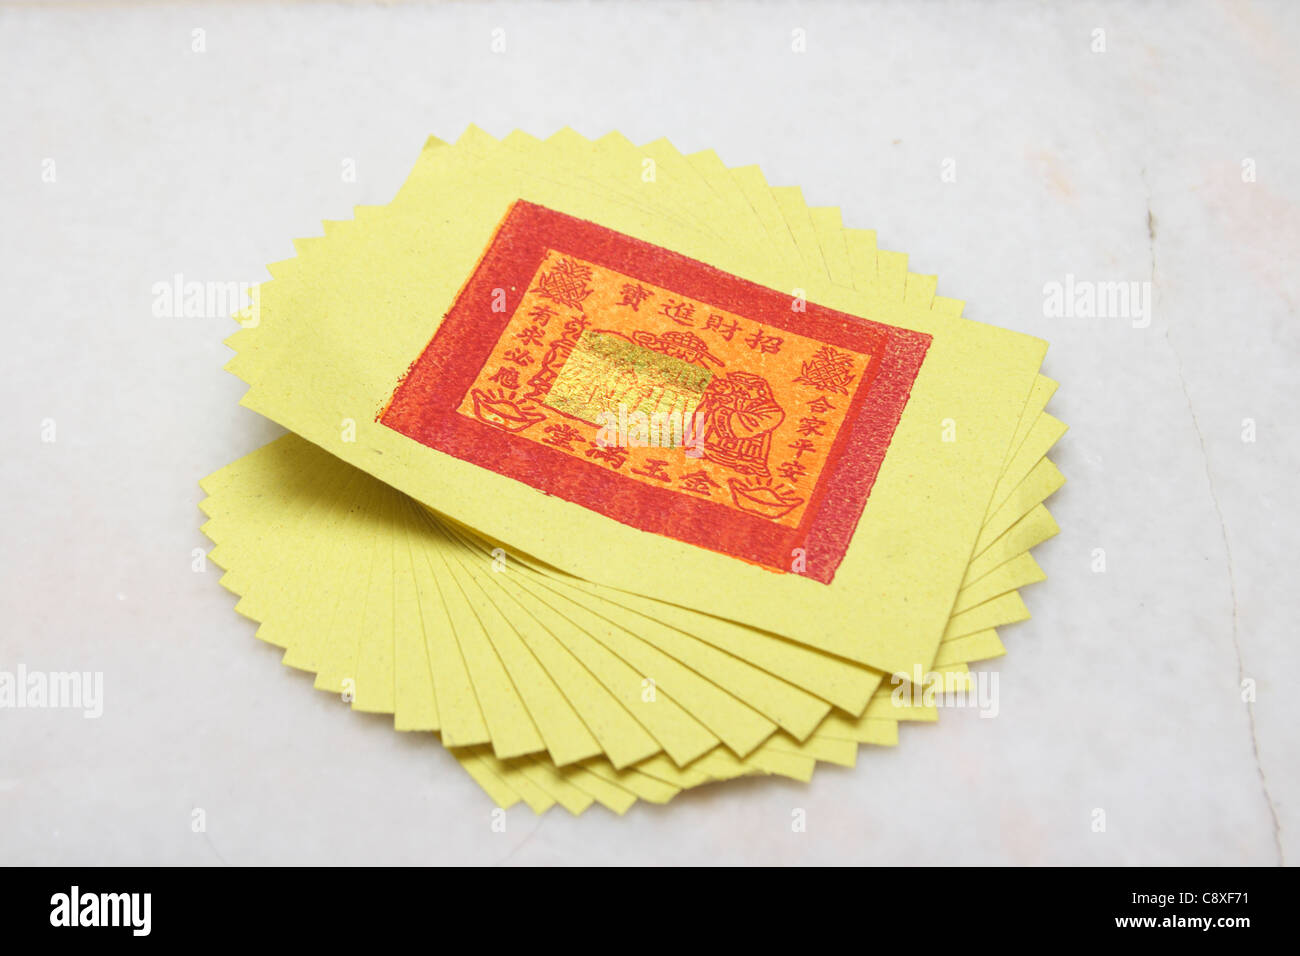 Joss Paper Roll In A Shape, Gold And Silver Colored For Burning In Chinese  Traditional Activity Stock Photo, Picture and Royalty Free Image. Image  111008837.